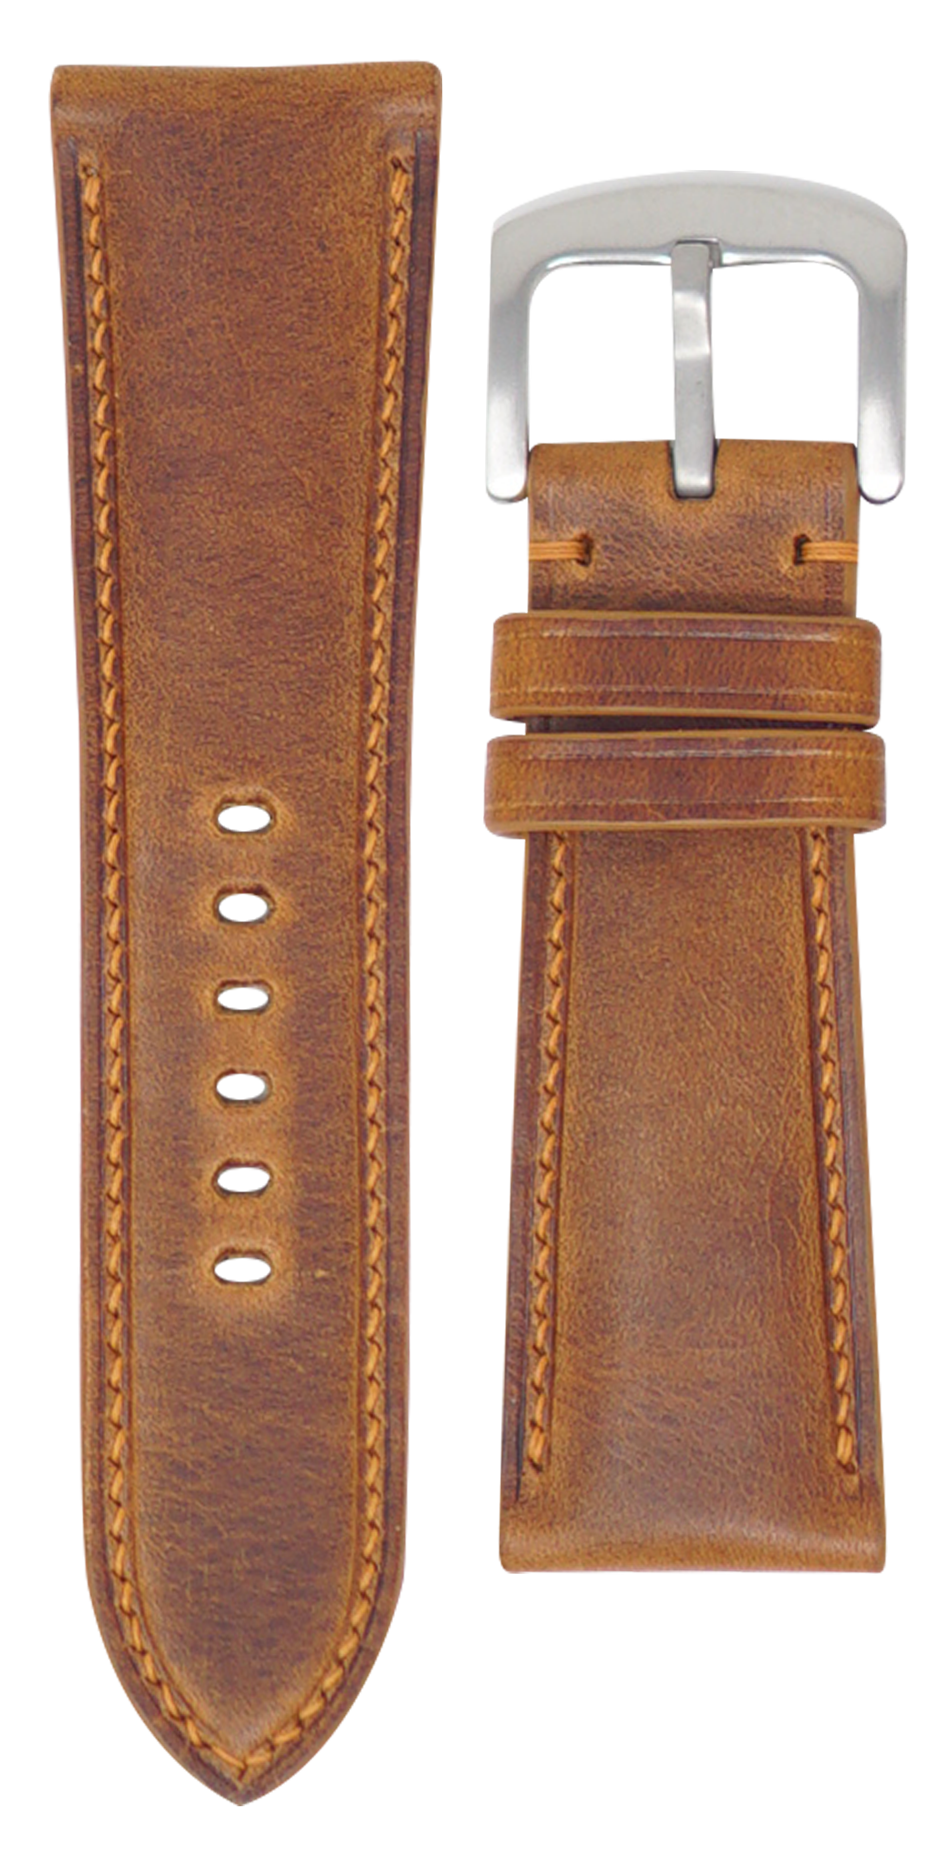 26mm watch strap - quick release